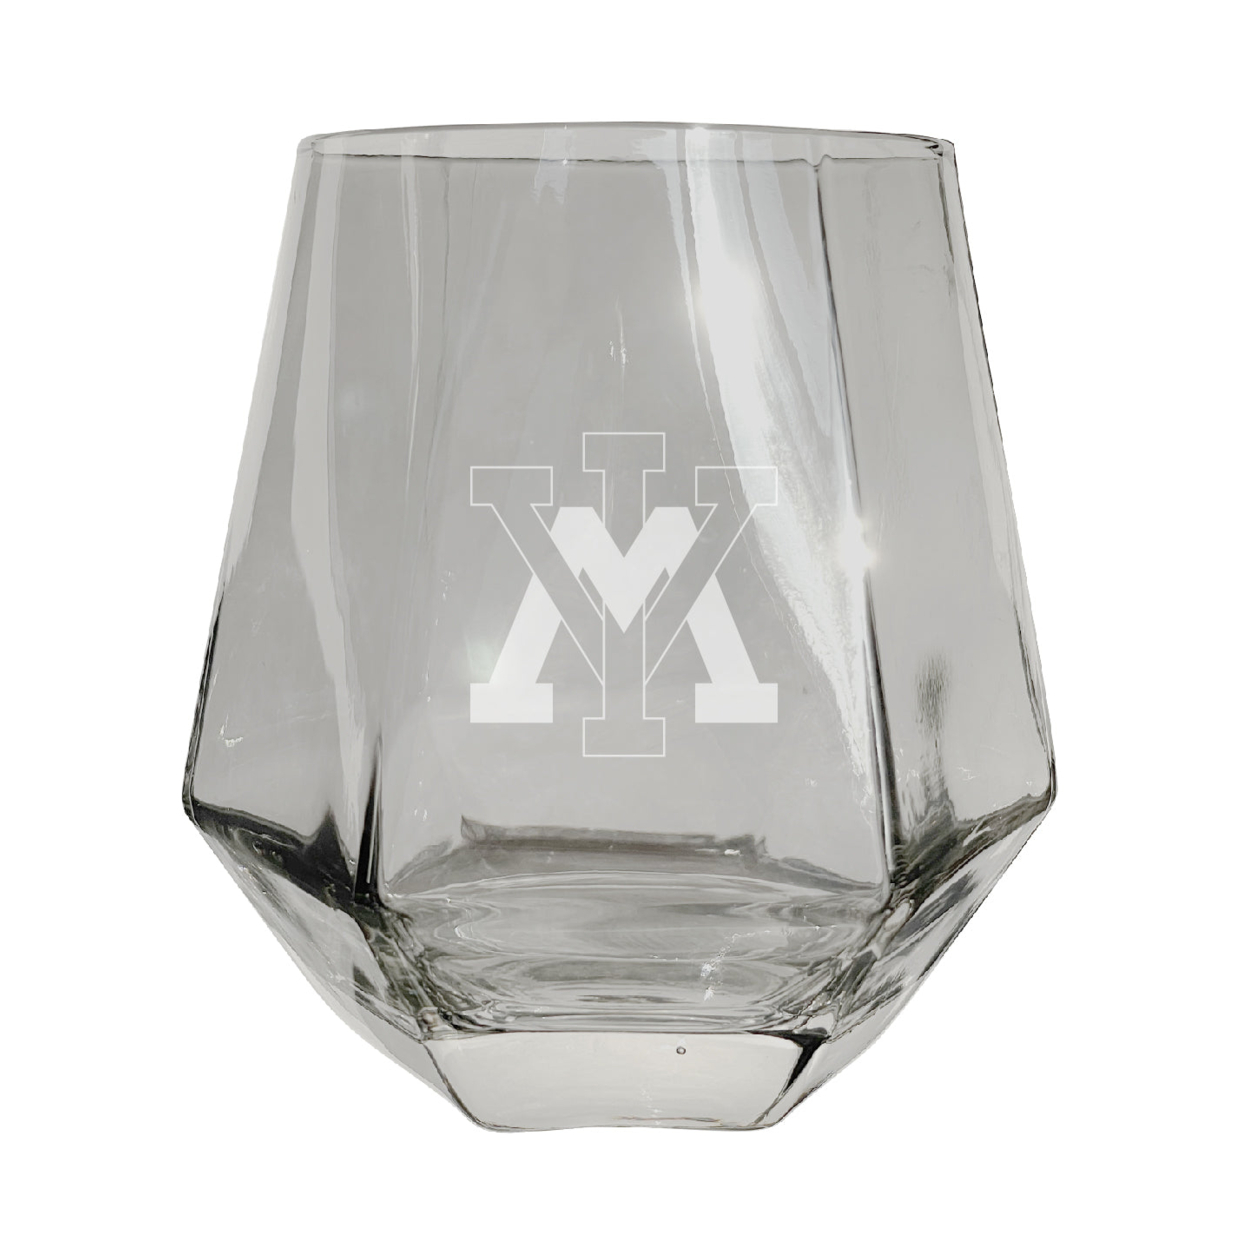 VMI Keydets Etched Diamond Cut Stemless 10 Ounce Wine Glass Clear